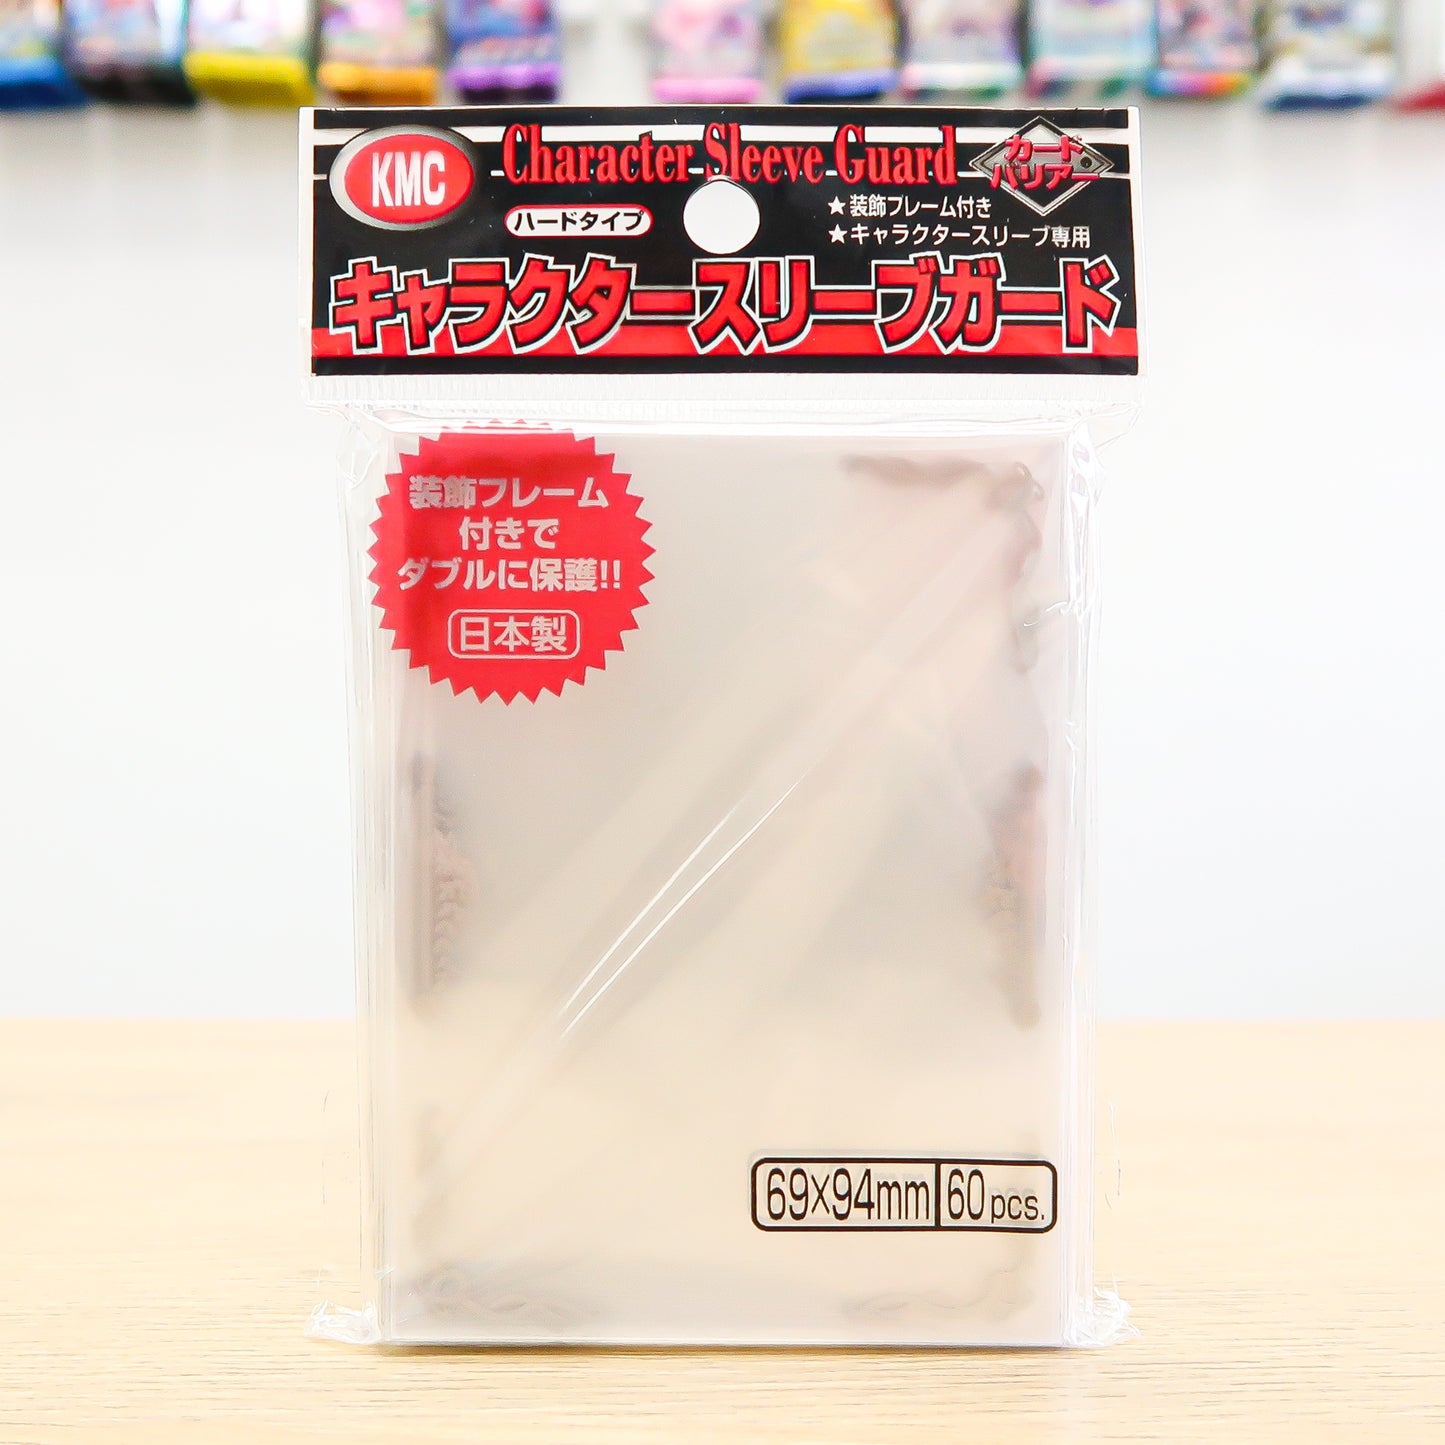 Card Barrier Character Sleeve Guard Silver